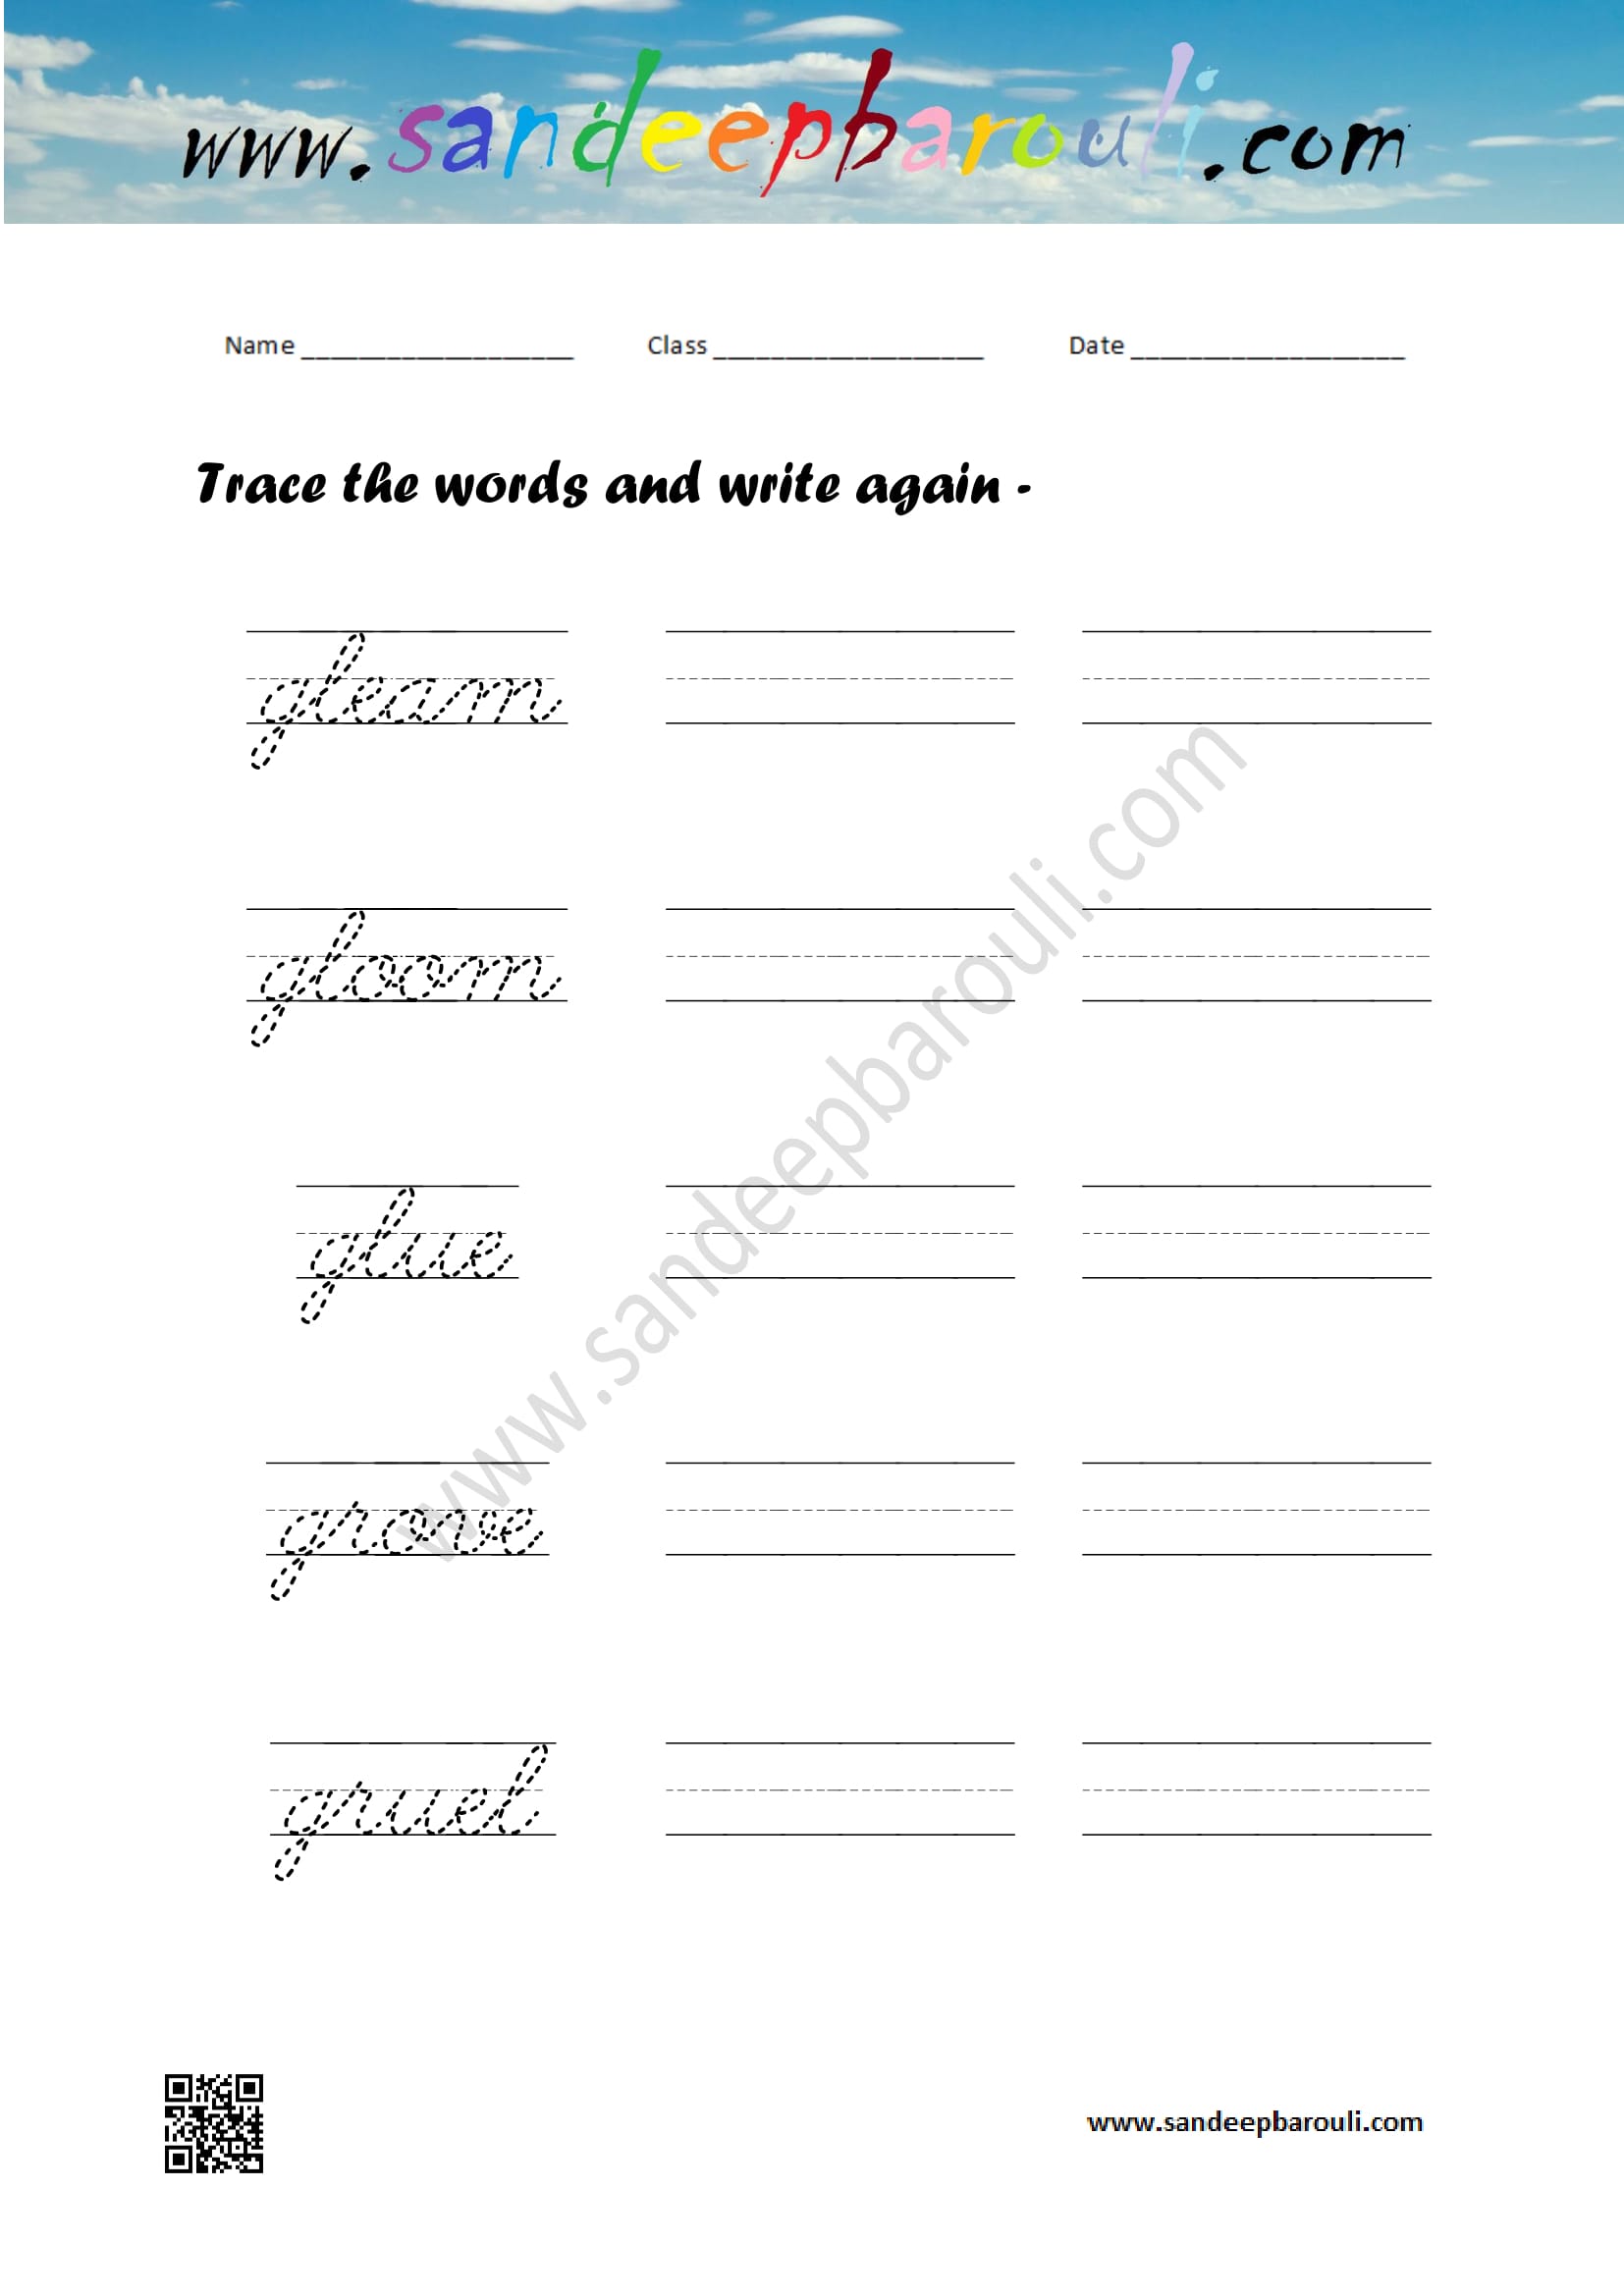 Cursive writing worksheet – trace the words and write again (97)